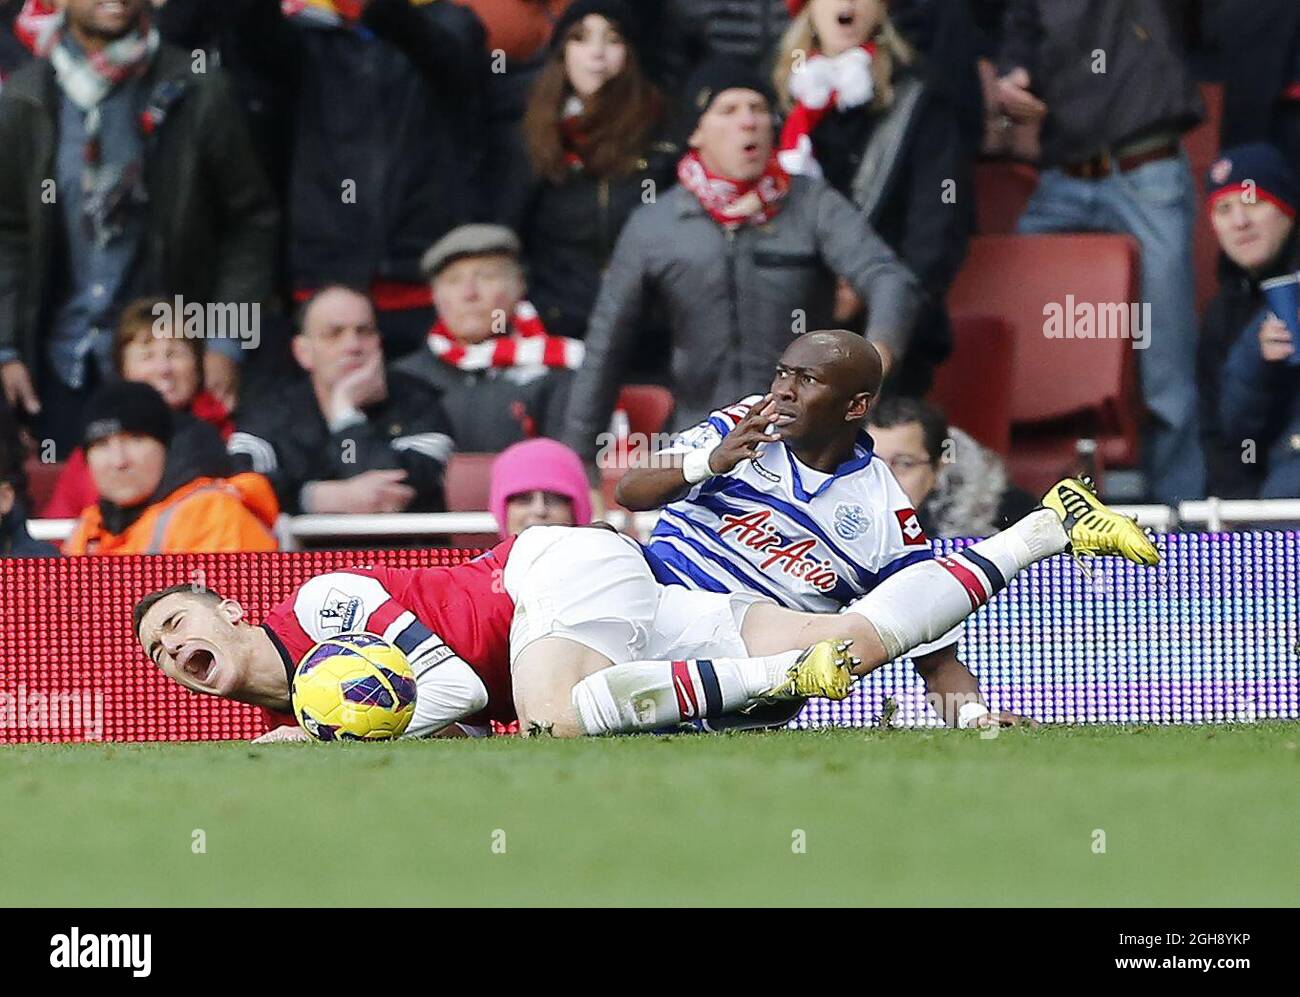 QPR's Stephane Mbia gets sent off for this tackle on Arsenal's Thomas Vermaelen during the Barclays Premier League match at the Emirates Stadium, London on October 27, 2012. Stock Photo